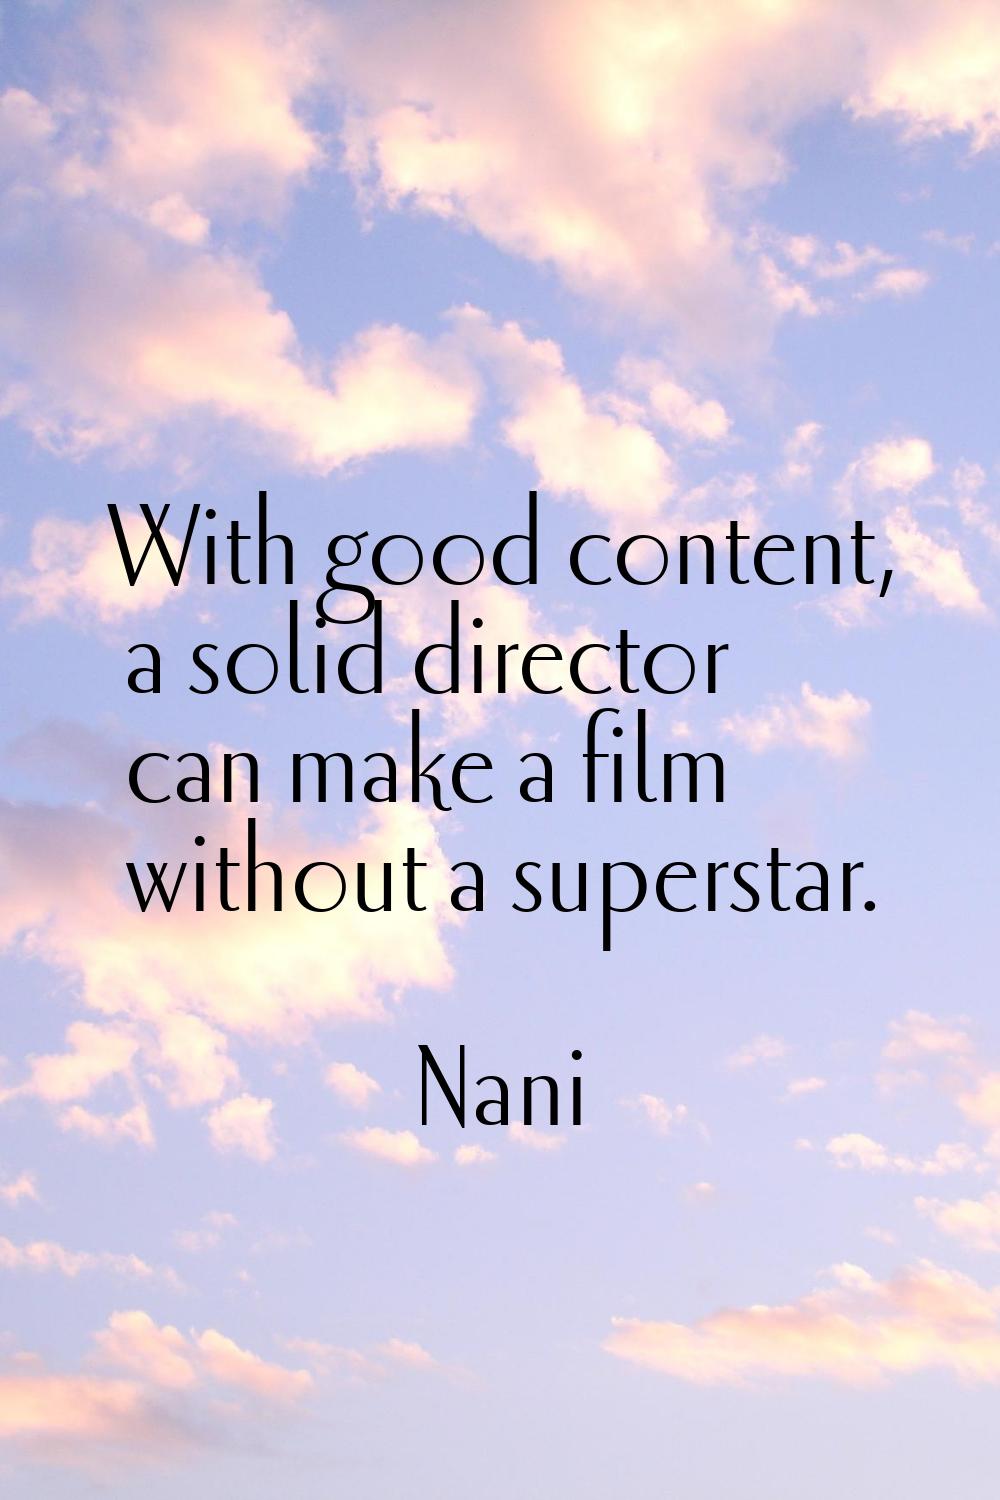 With good content, a solid director can make a film without a superstar.